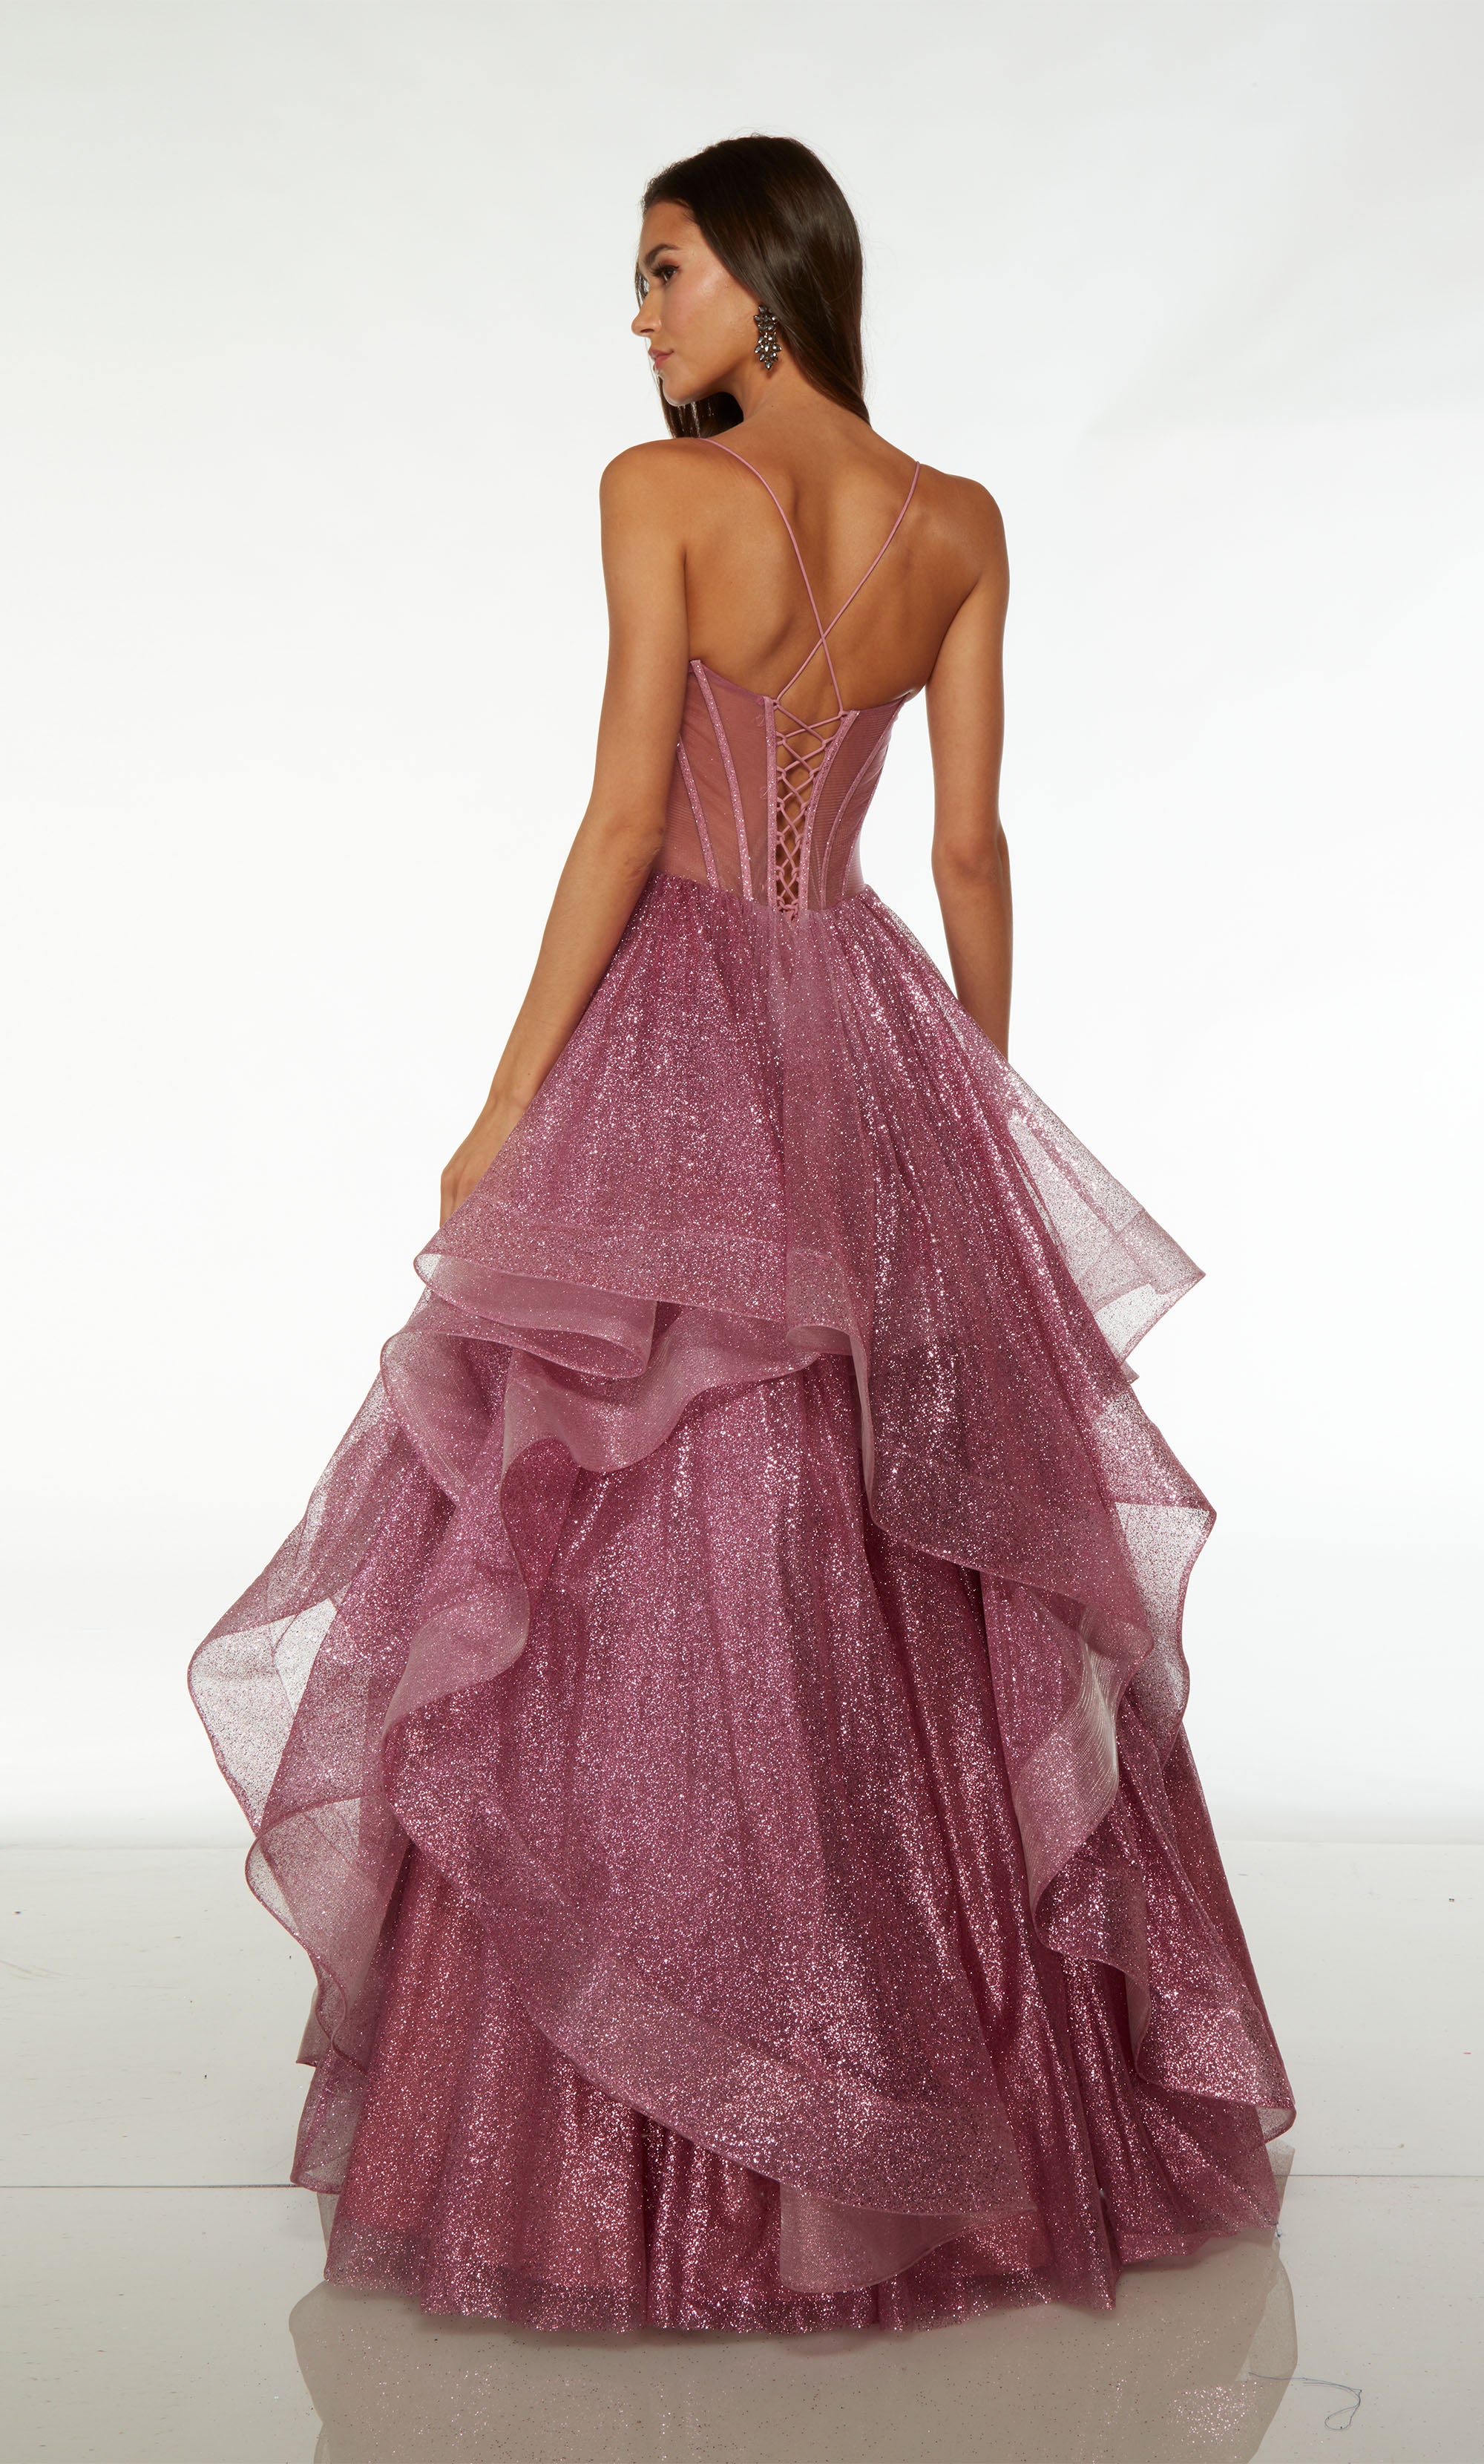 Elegant pink corset ball gown with an hand-beaded sheer bodice and an ruffled skirt in glitter tulle fabric for an glamorous and enchanting look.